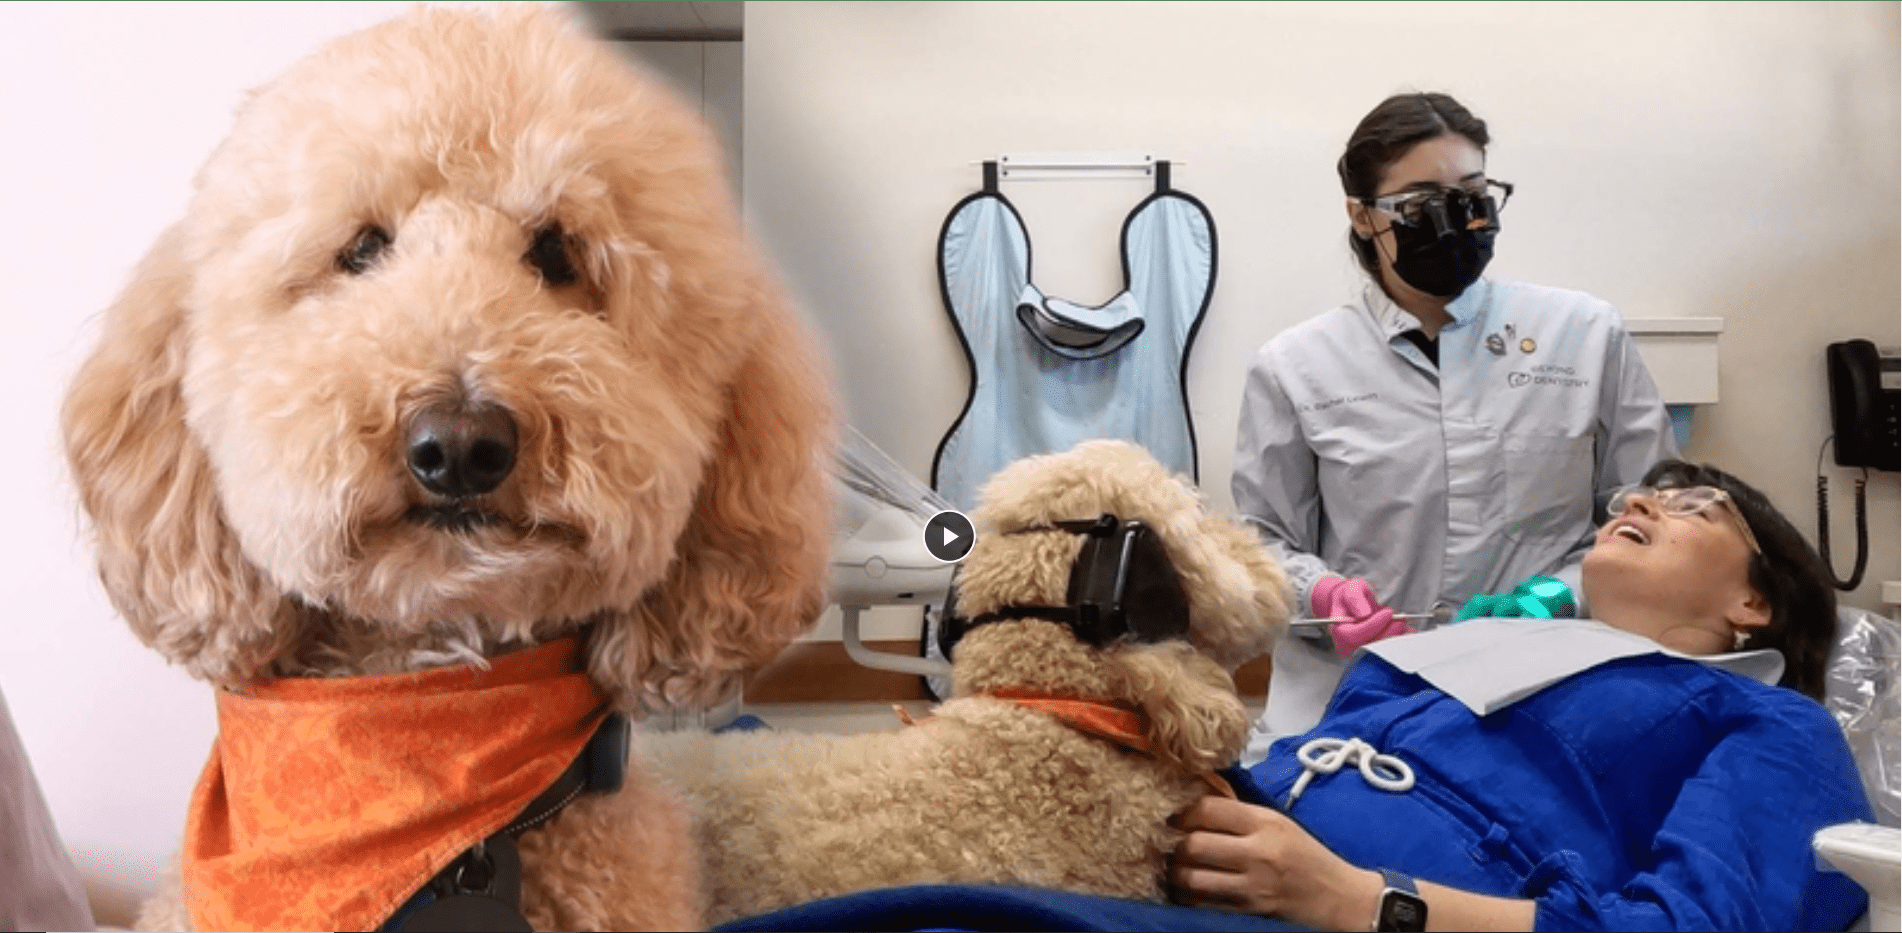 A video thumbnail showing Dr. Lewin's service dog August.